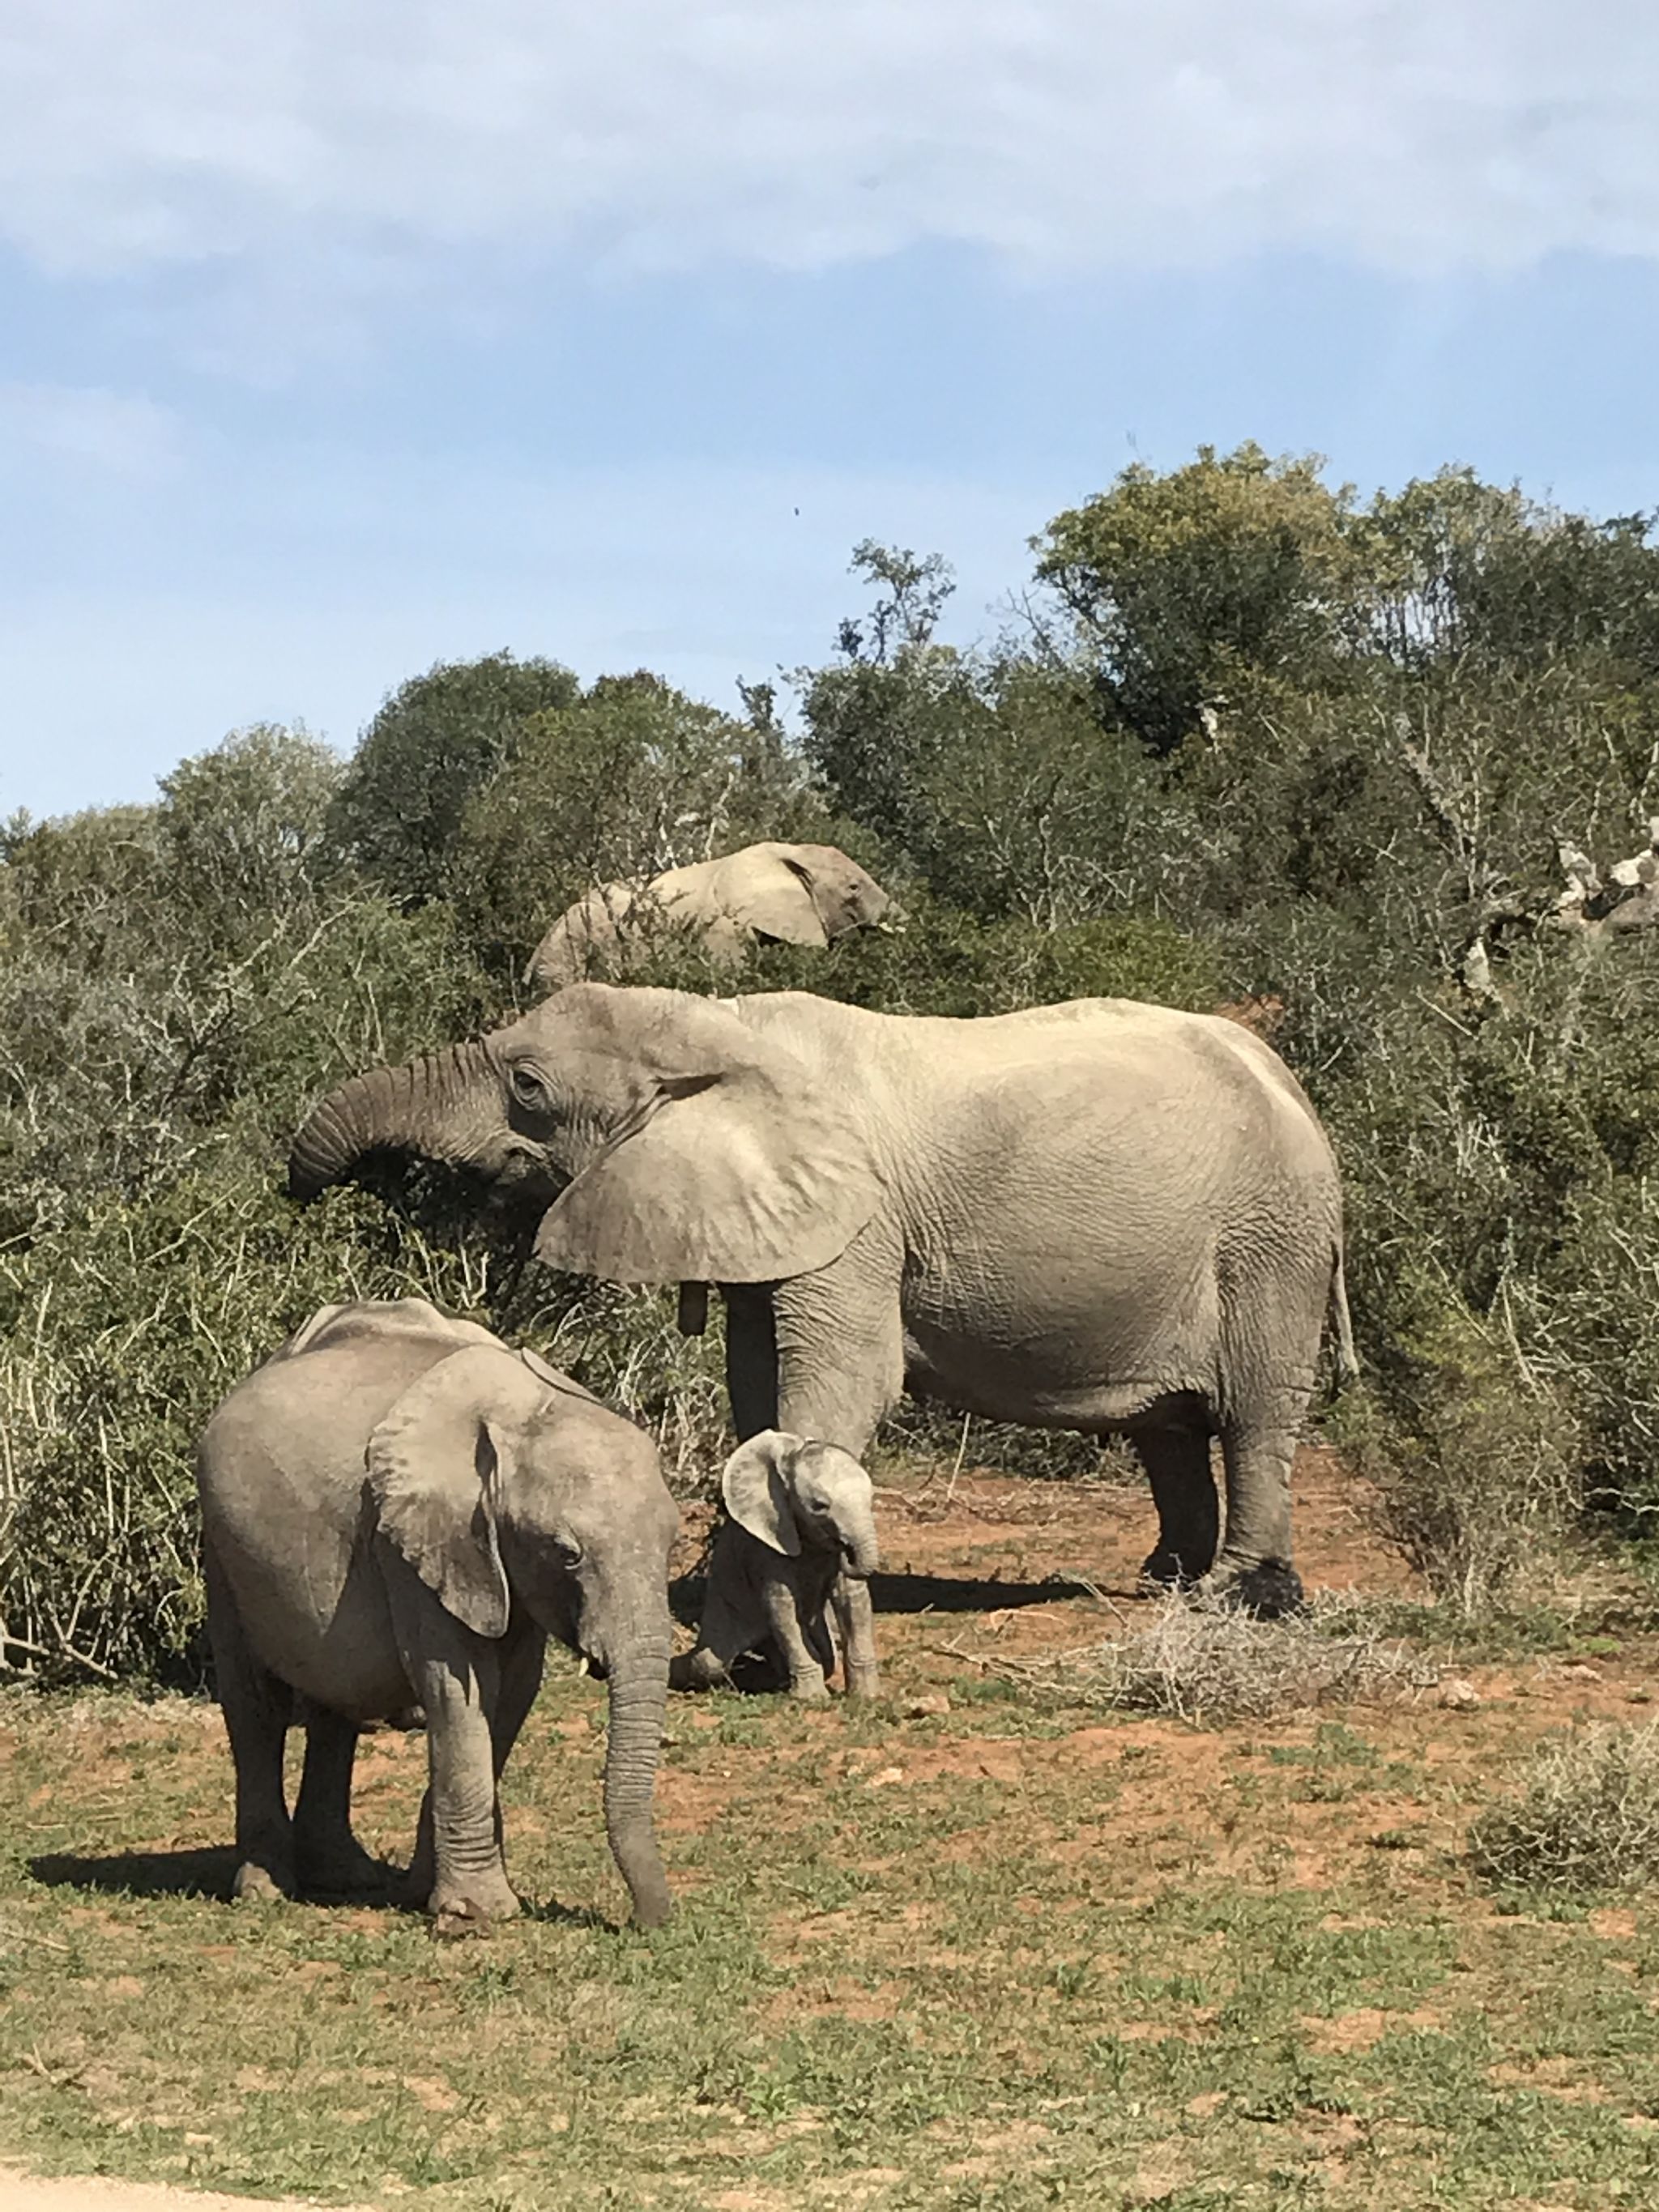 Just some of the 600 elephants in Addo!